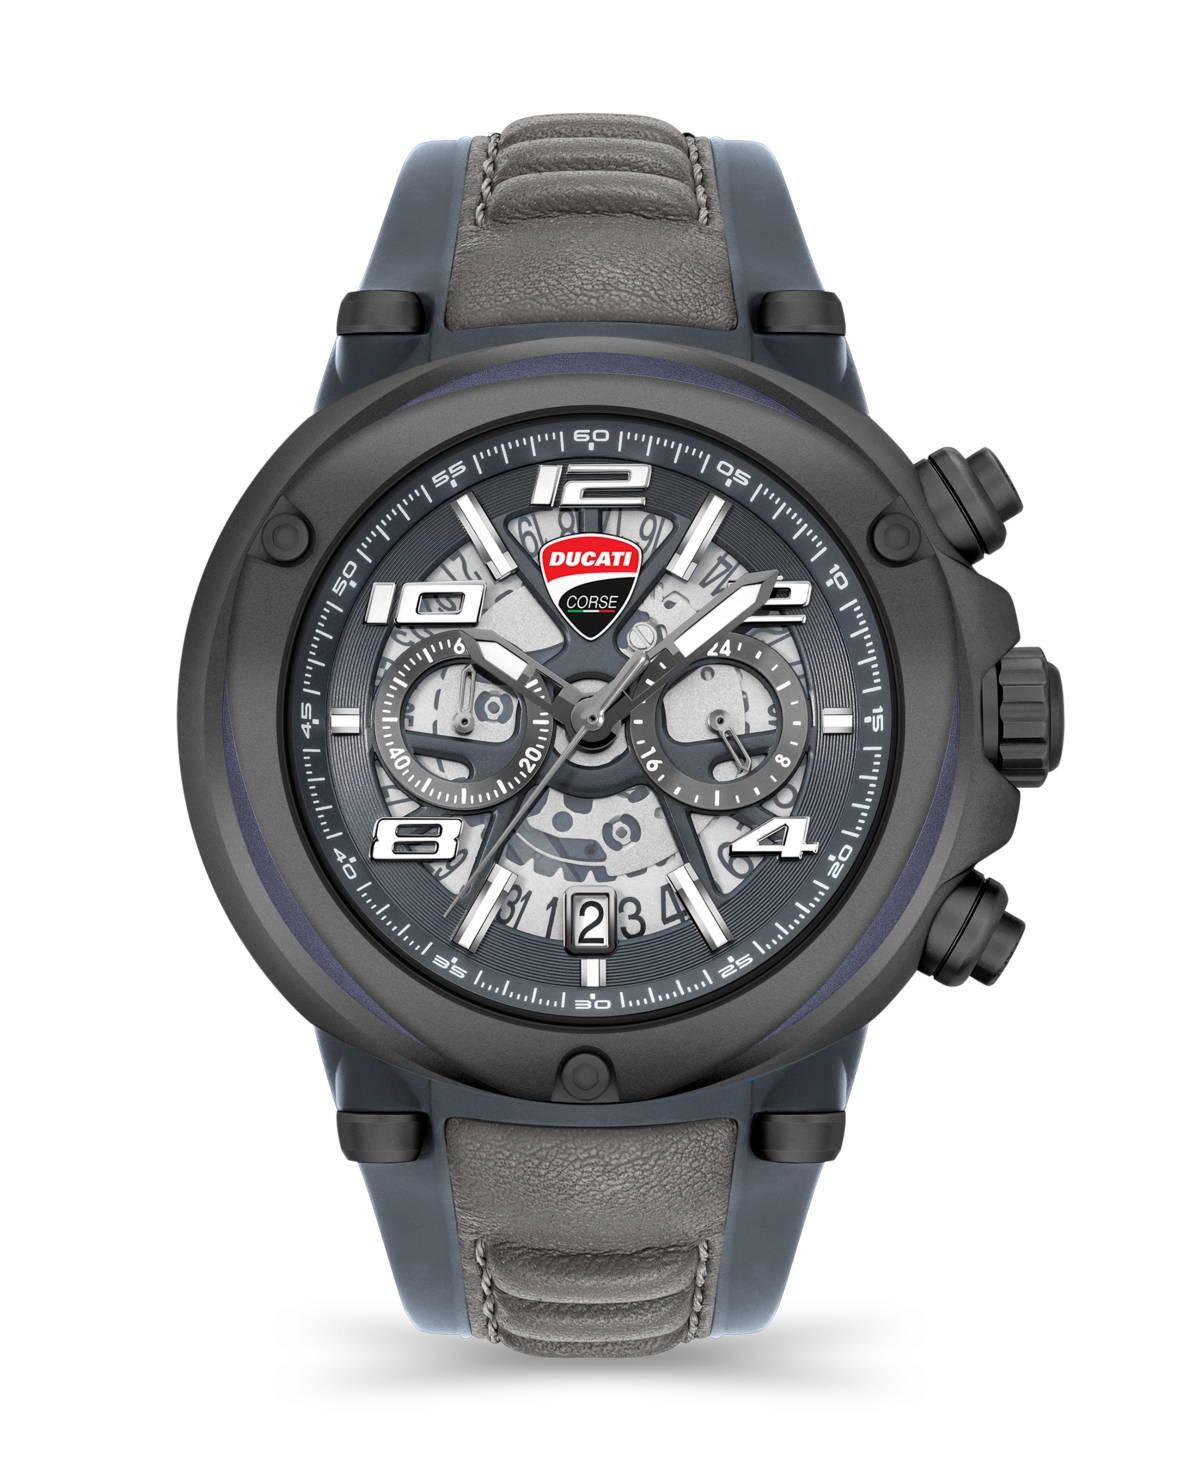 Ducati Corse Men's Partenza Collection Chronograph Timepiece Black Silicon with Gray Leather Strap Watch, 49mm